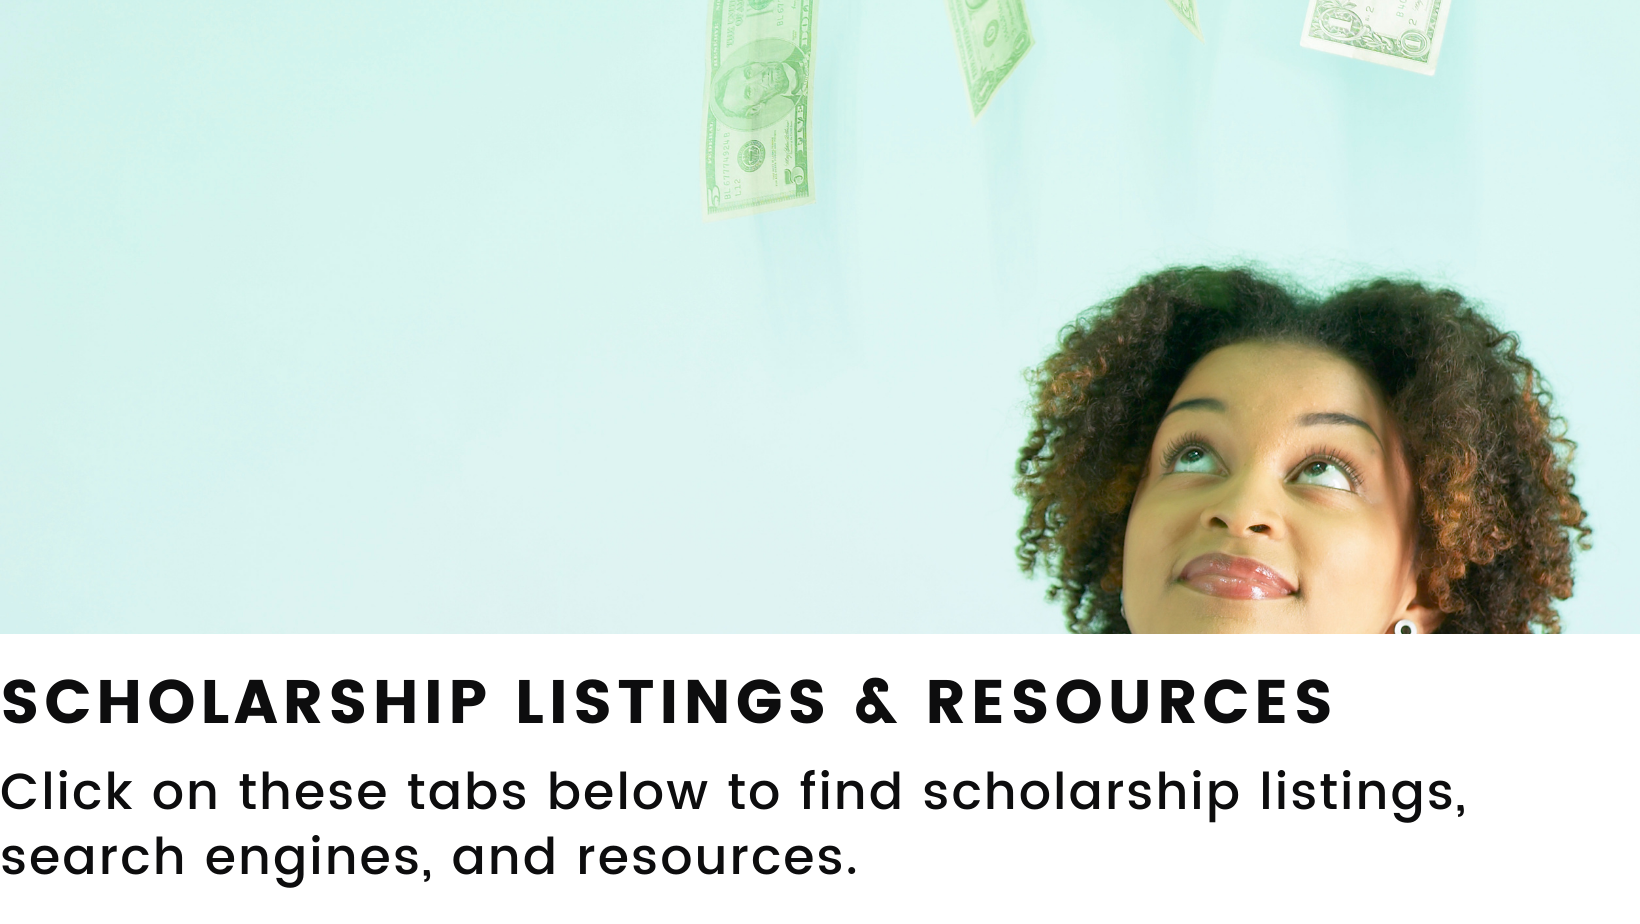 Features an image of a person looking at money. Header: Scholarship Listings and Resources. Body: Click on these tabs below to more find scholarship listings, search engines, and  resources. 